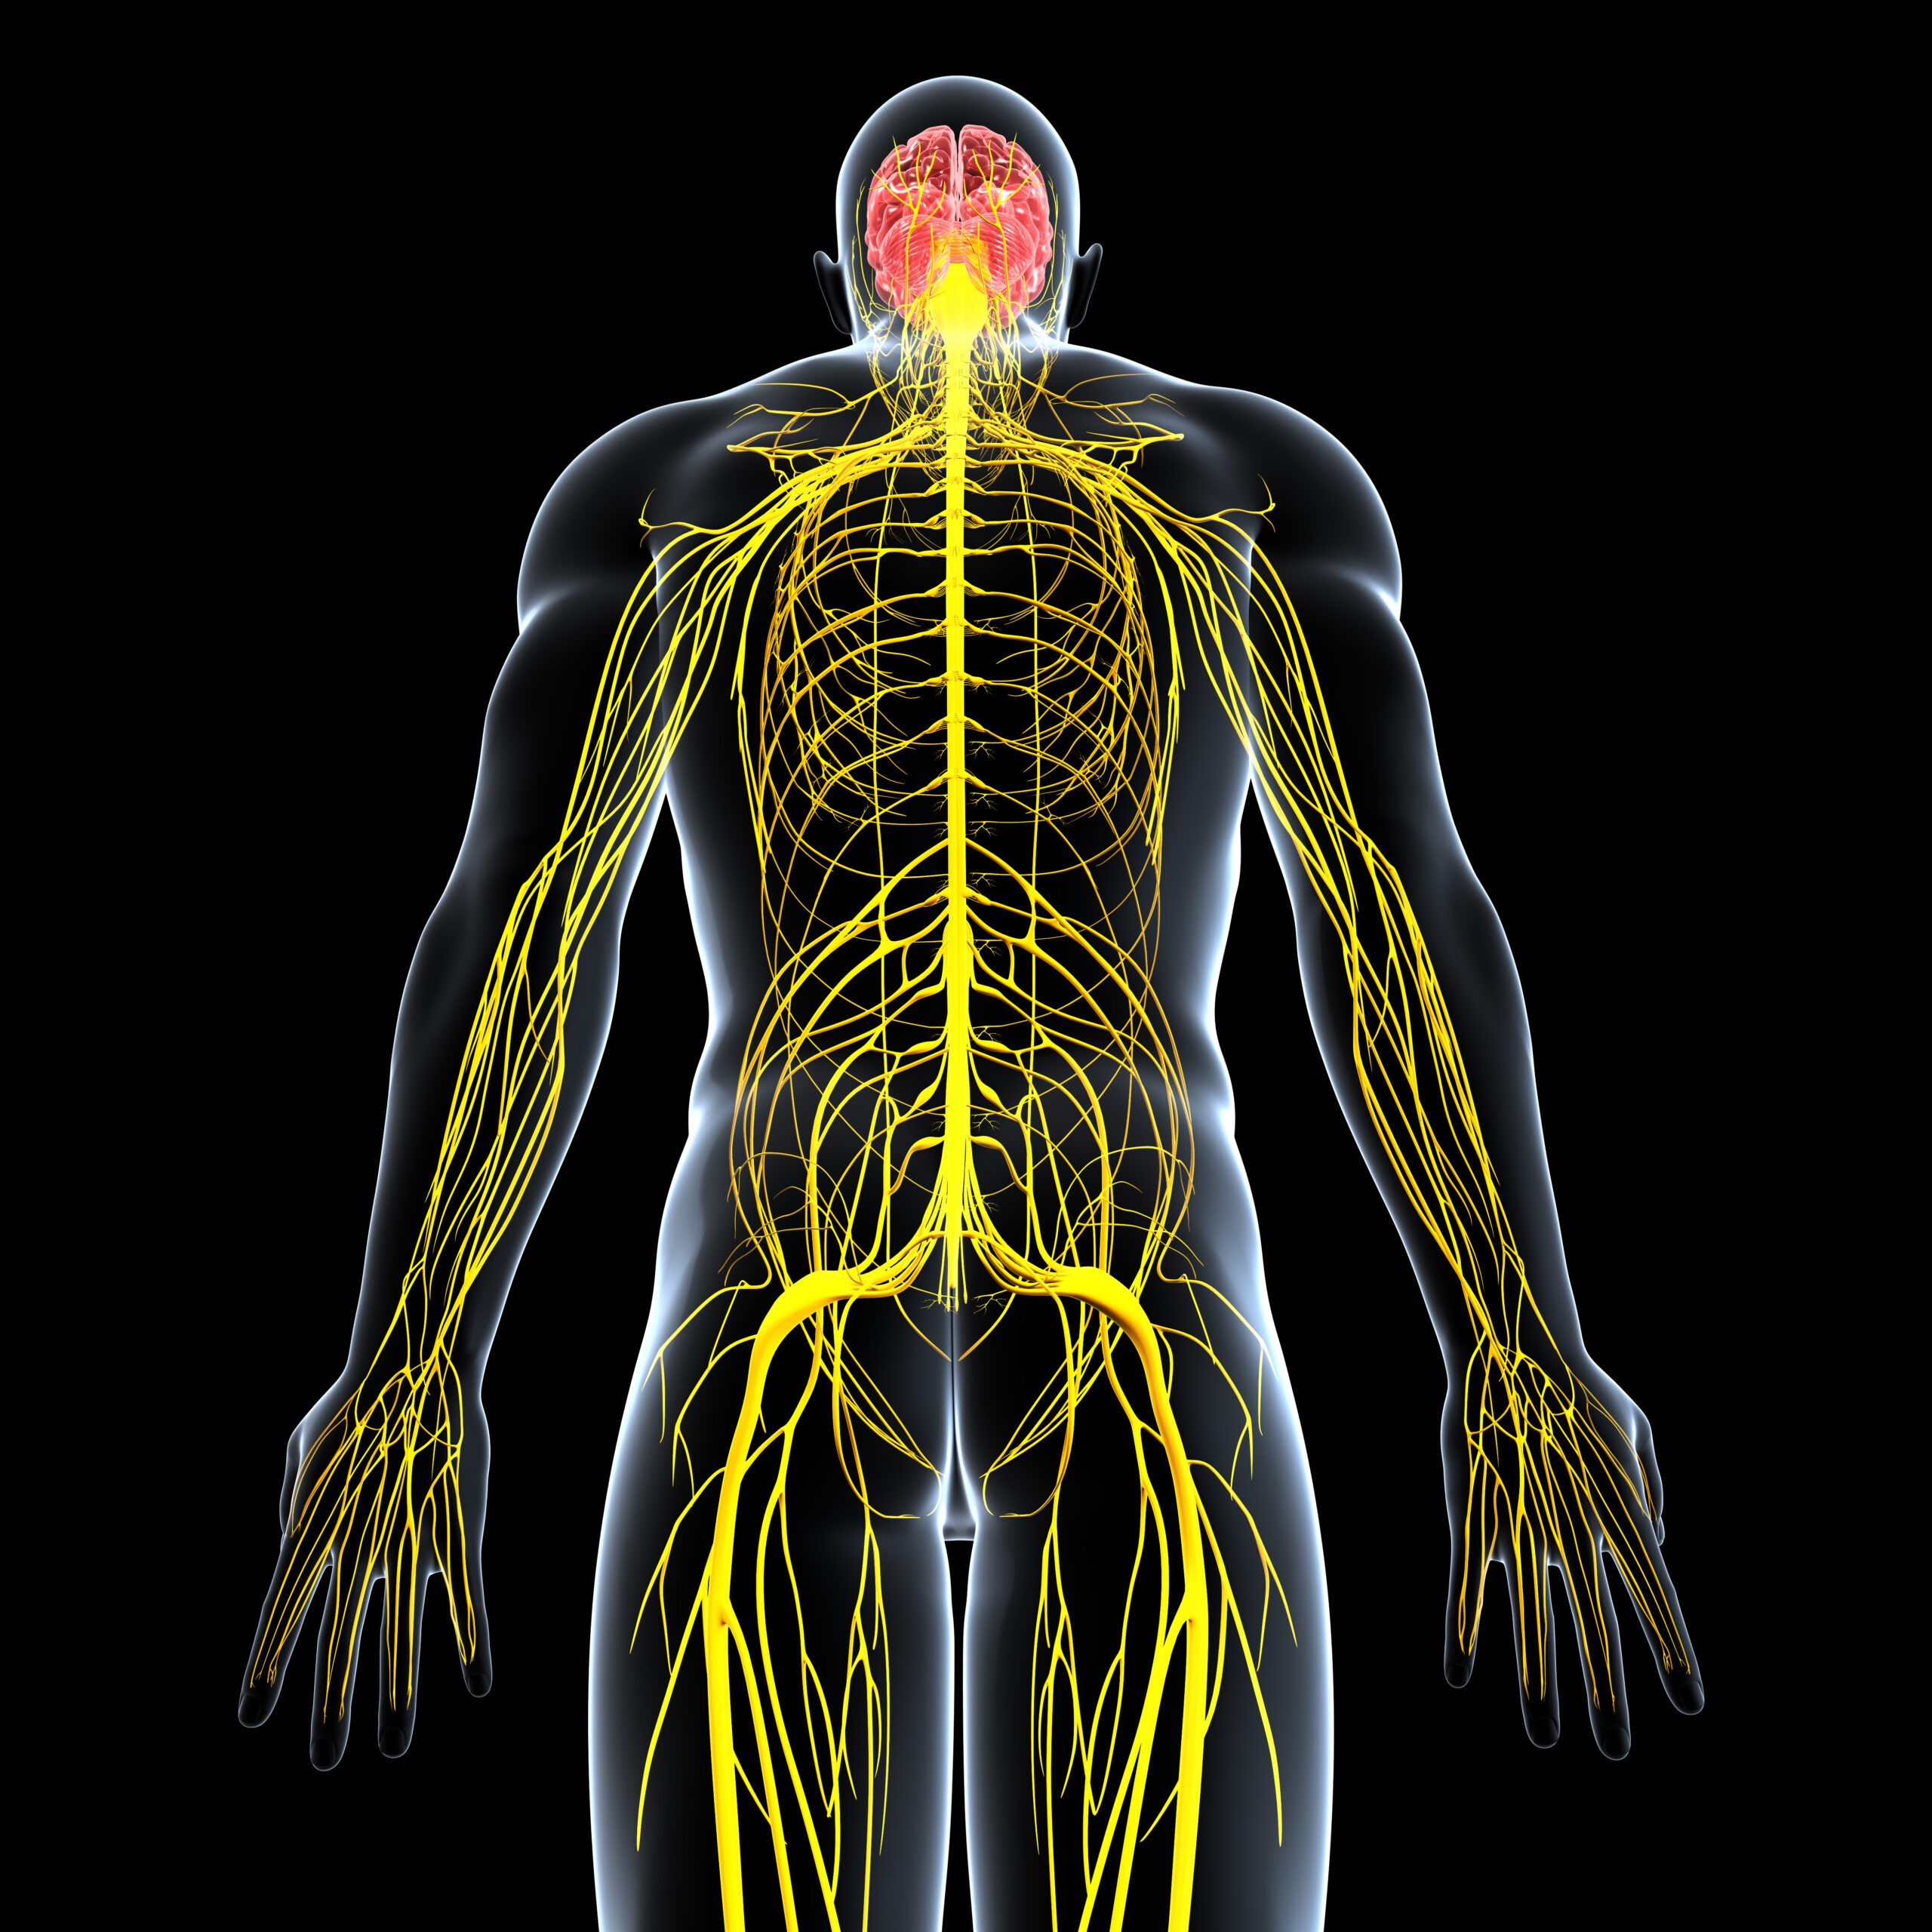 Nervous system of male body anatomy with highlighted brain anatomy